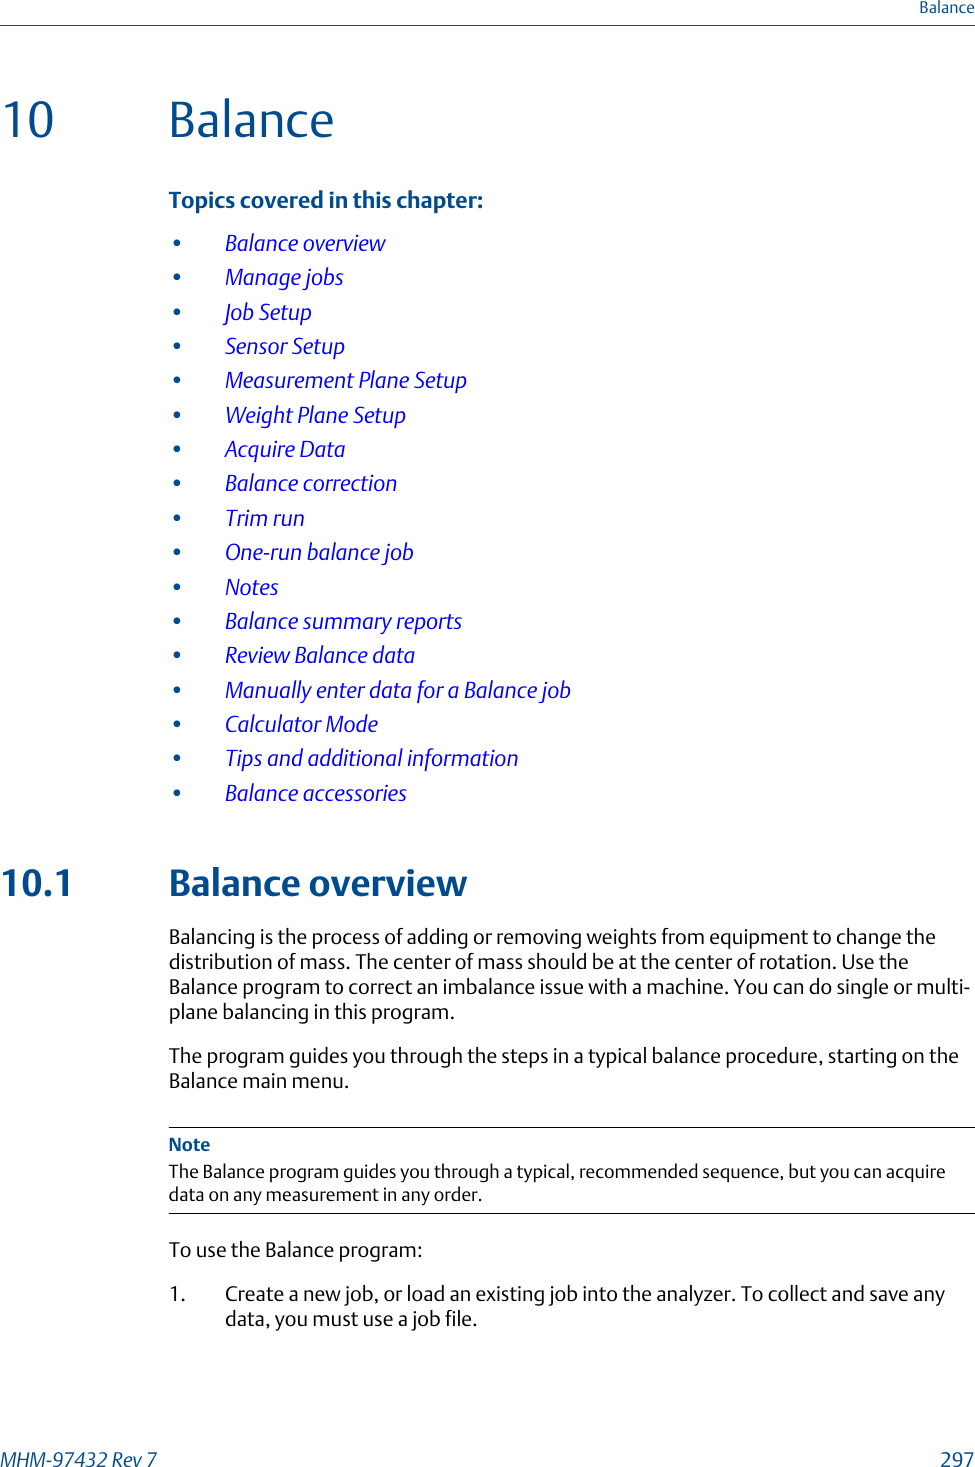 10 BalanceTopics covered in this chapter:•Balance overview•Manage jobs•Job Setup•Sensor Setup•Measurement Plane Setup•Weight Plane Setup•Acquire Data•Balance correction•Trim run•One-run balance job•Notes•Balance summary reports•Review Balance data•Manually enter data for a Balance job•Calculator Mode•Tips and additional information•Balance accessories10.1 Balance overviewBalancing is the process of adding or removing weights from equipment to change thedistribution of mass. The center of mass should be at the center of rotation. Use theBalance program to correct an imbalance issue with a machine. You can do single or multi-plane balancing in this program.The program guides you through the steps in a typical balance procedure, starting on theBalance main menu.NoteThe Balance program guides you through a typical, recommended sequence, but you can acquiredata on any measurement in any order.To use the Balance program:1. Create a new job, or load an existing job into the analyzer. To collect and save anydata, you must use a job file.BalanceMHM-97432 Rev 7  297